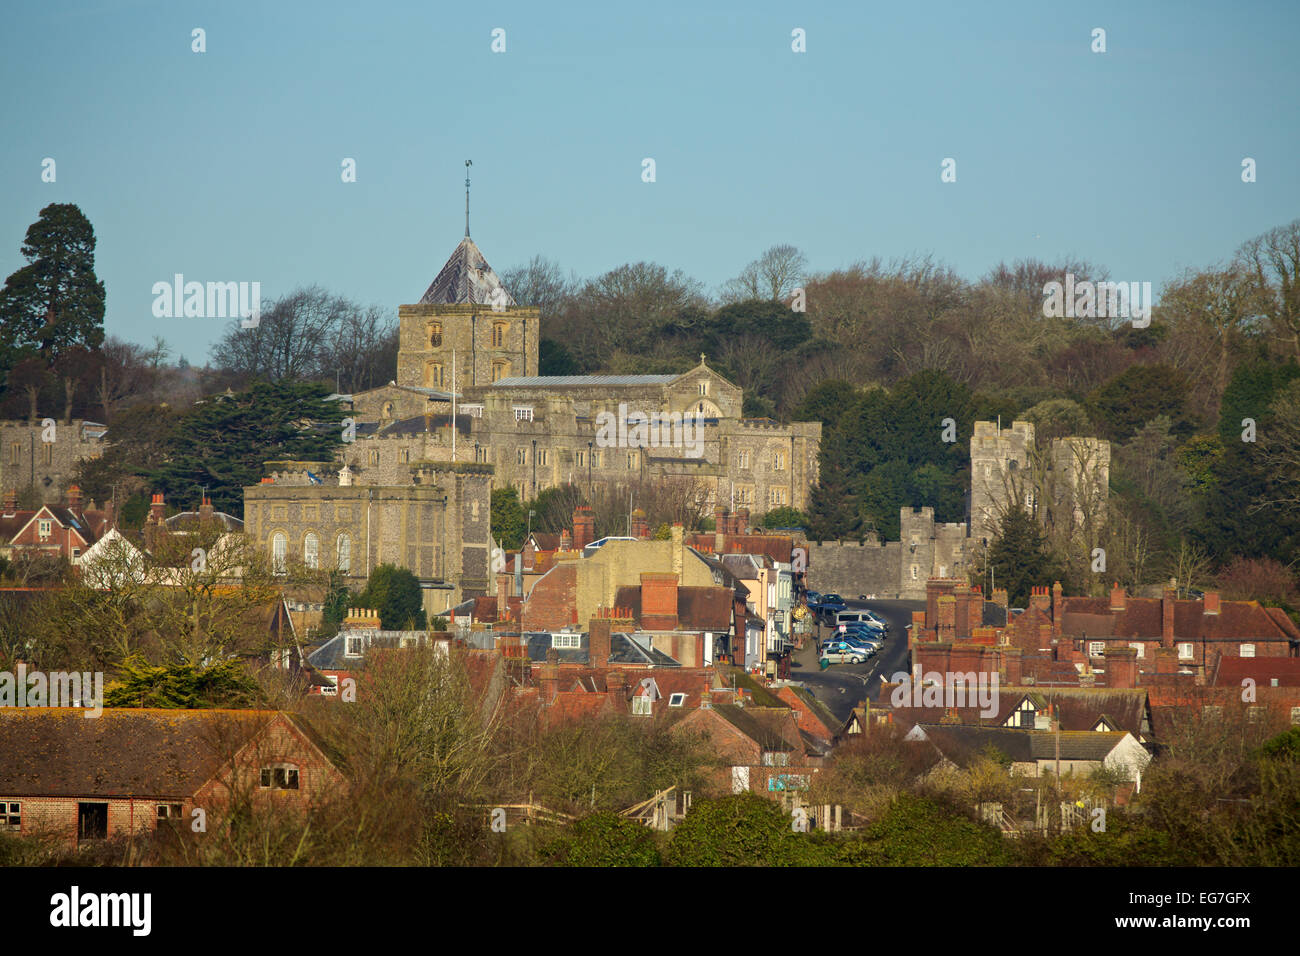 Distant shot of St Nicholas' church in the market town of Arundel West Sussex Stock Photo